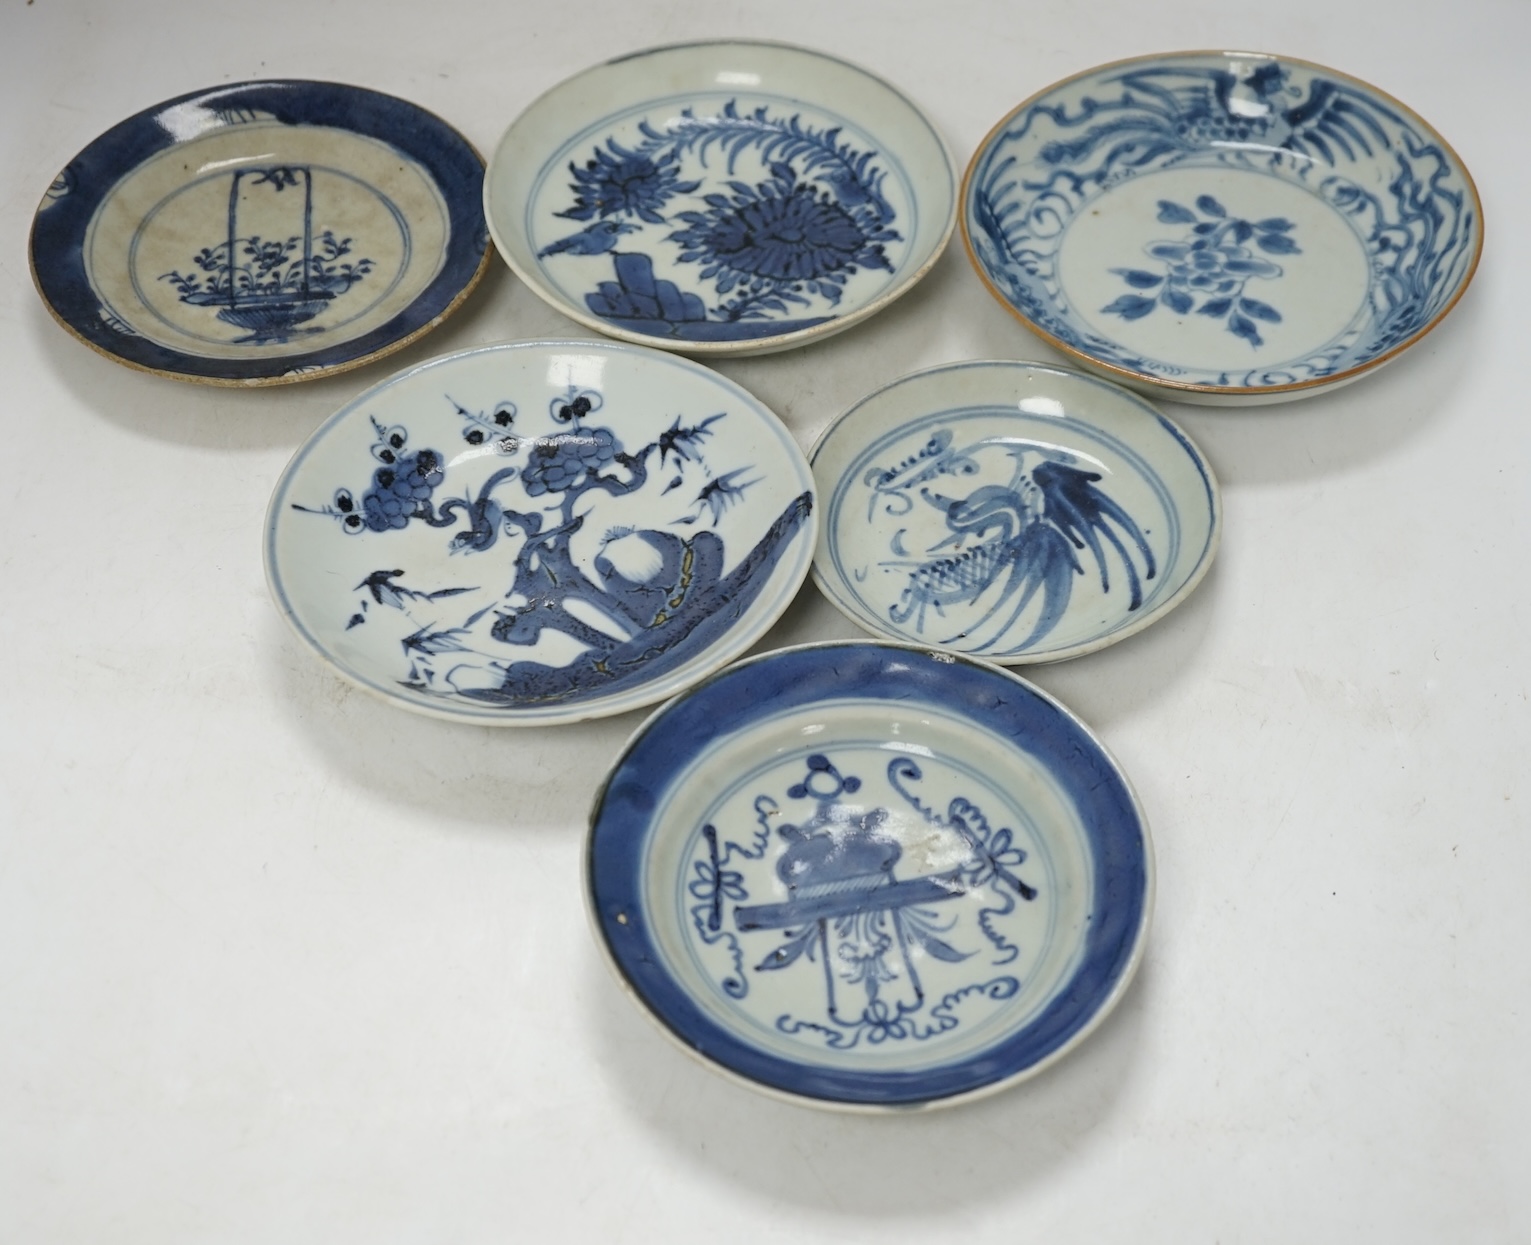 A group of 18th/19th century Chinese blue and white saucers and shallow dishes, largest 18cm in diameter. Condition - varies, mostly fair